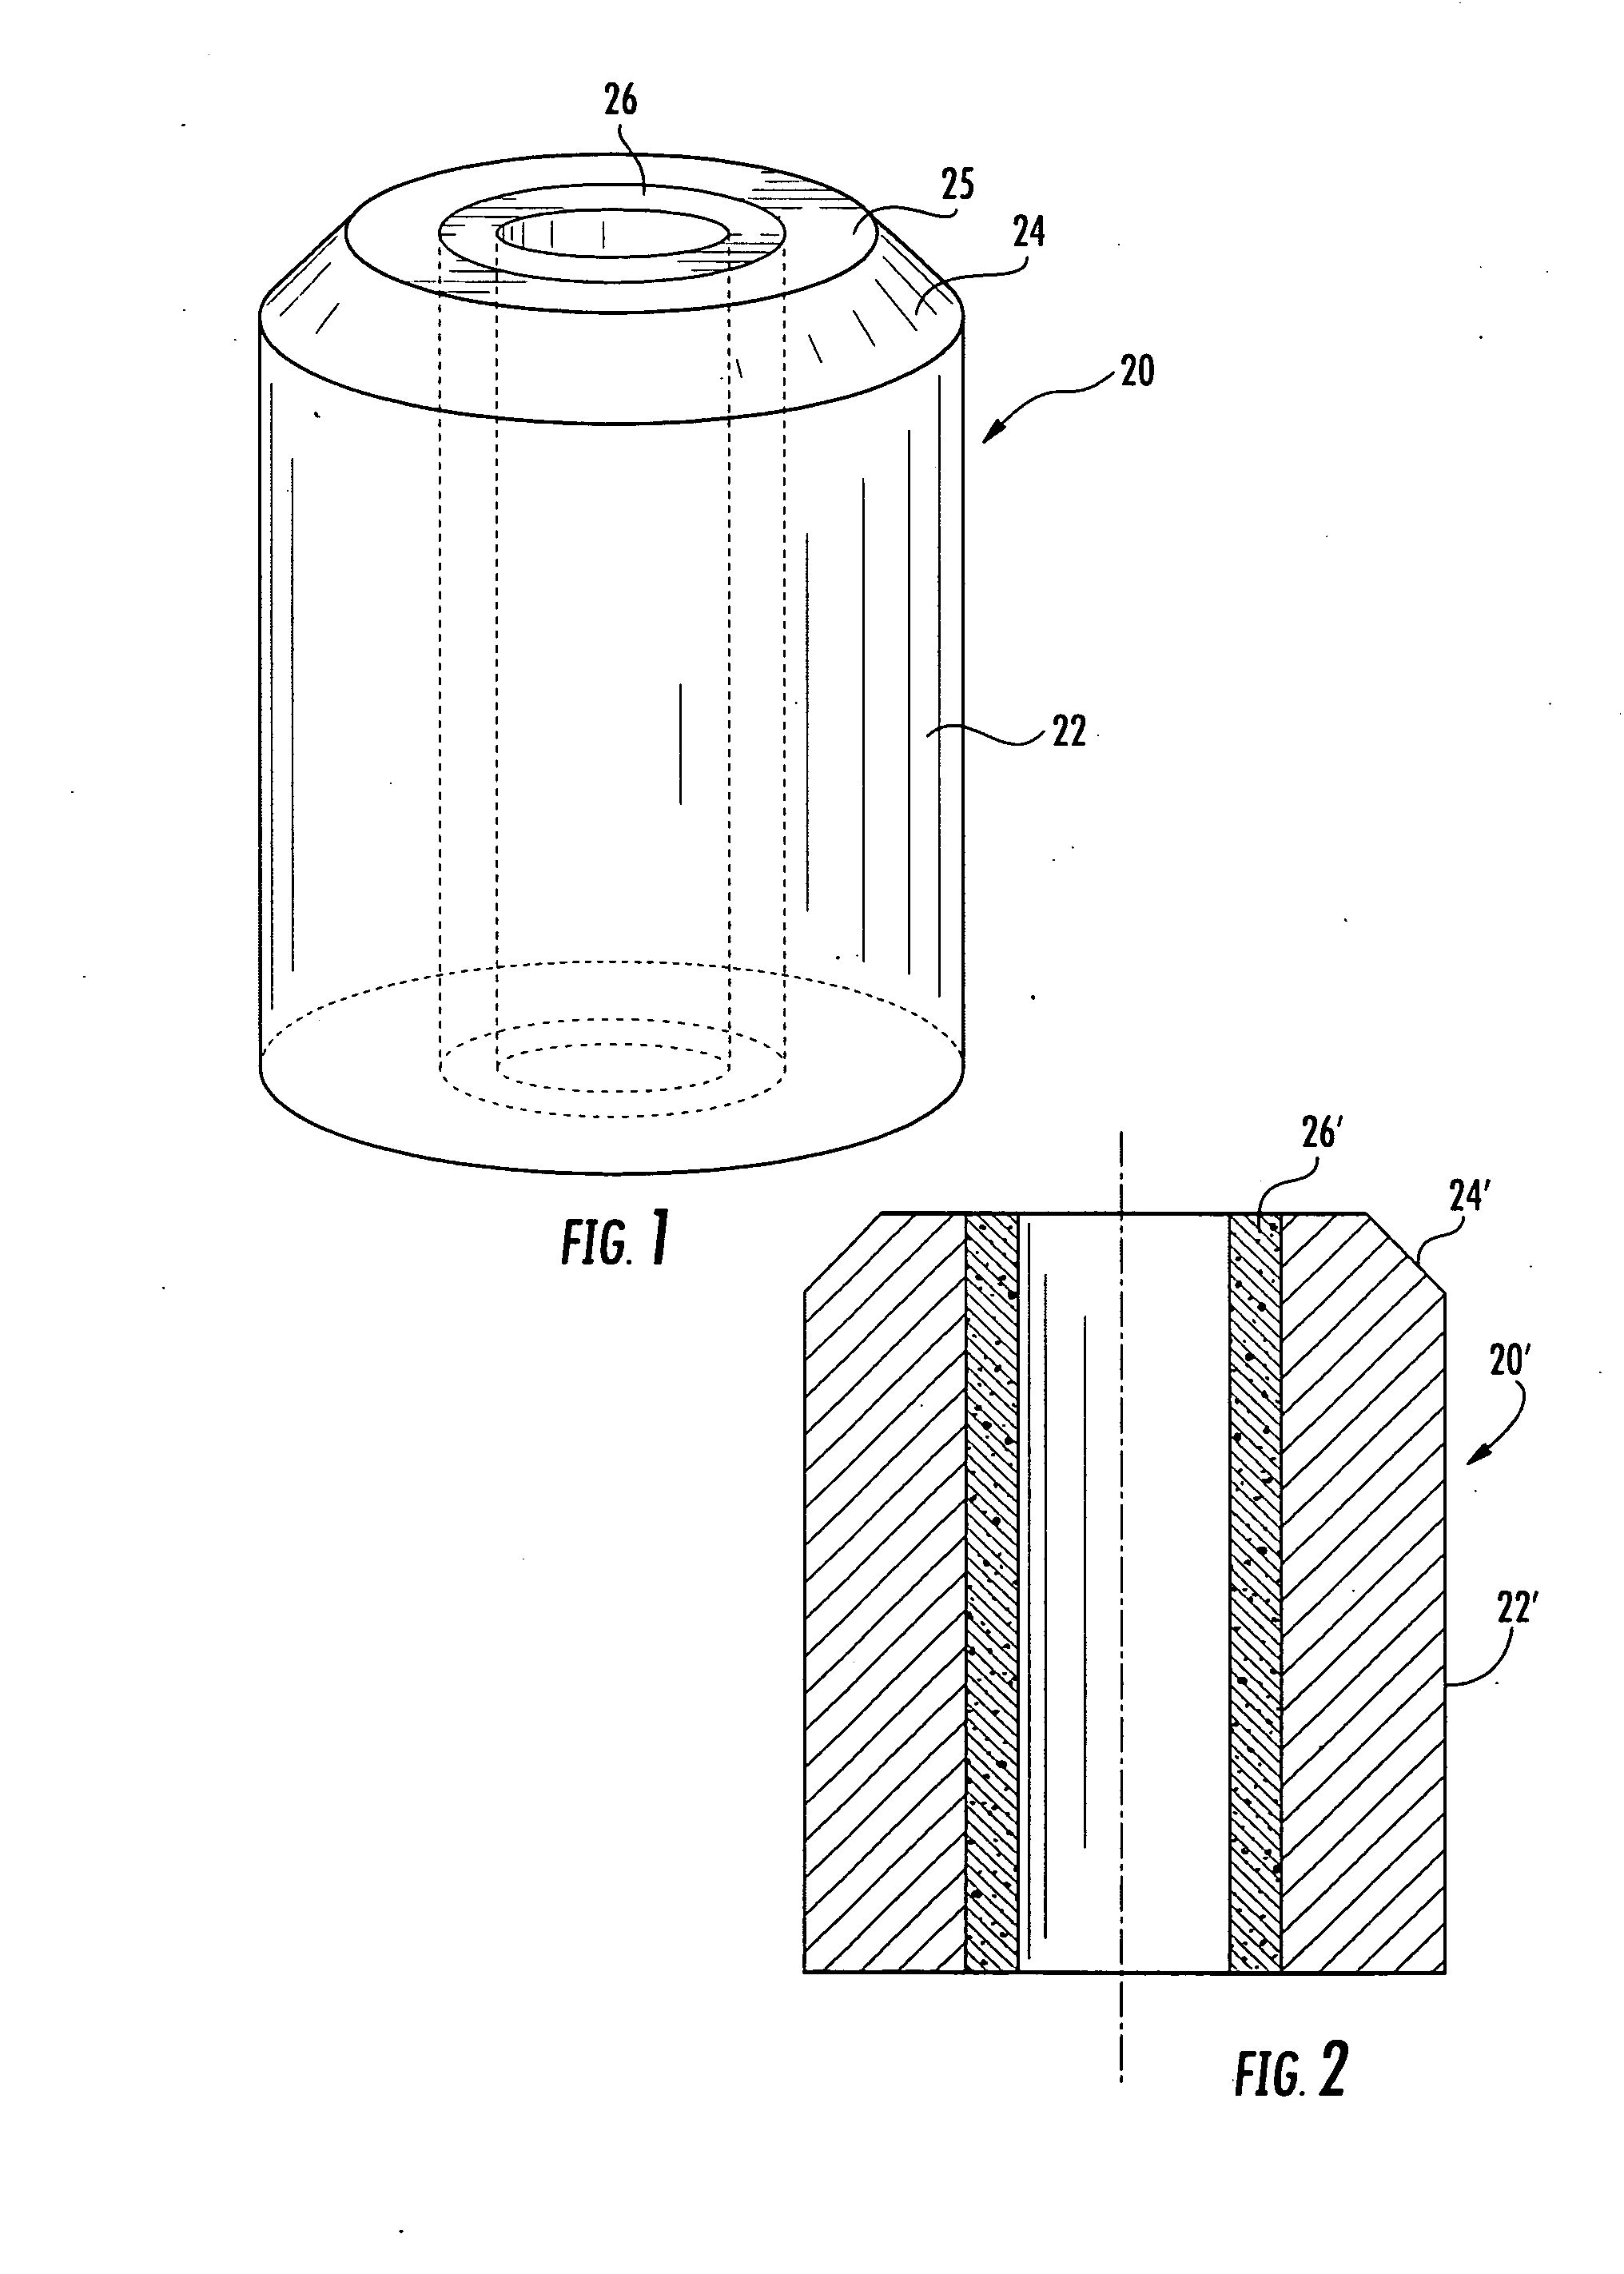 Composite Preform Having a Controlled Fraction of Porosity in at Least One Layer and Methods for Manufacture and Use